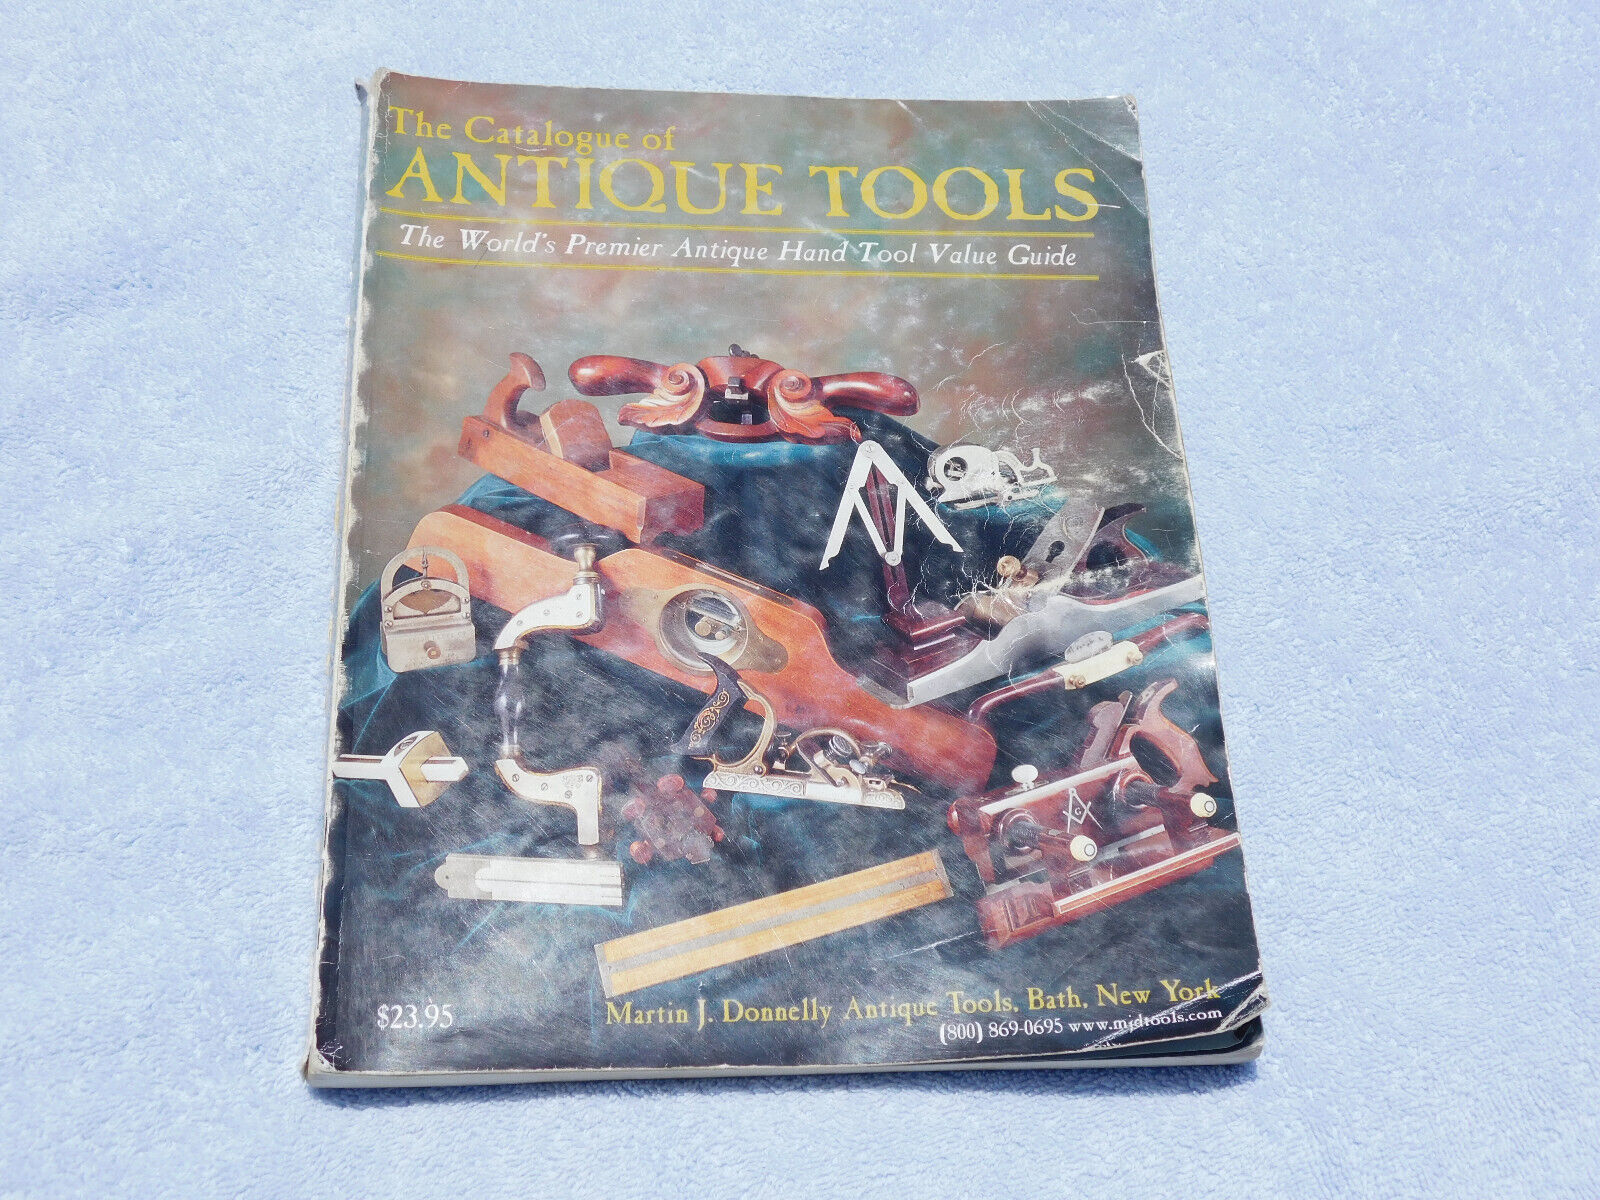 The Catalogue of Antique Tools, Martin J. Donnelly Antique Tools, 1999 Edition